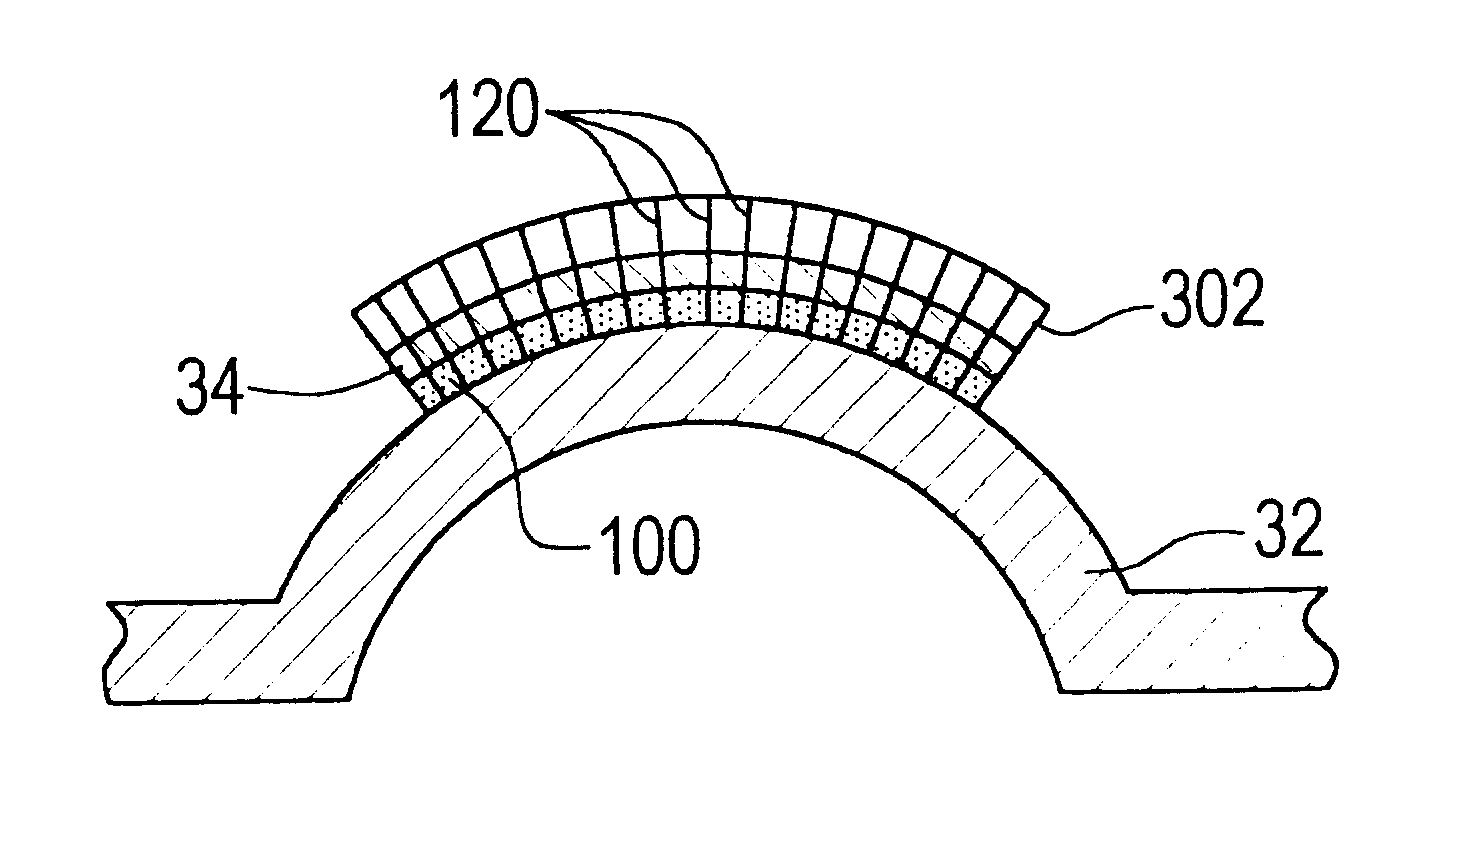 Method of manufacturing a perforated laminate